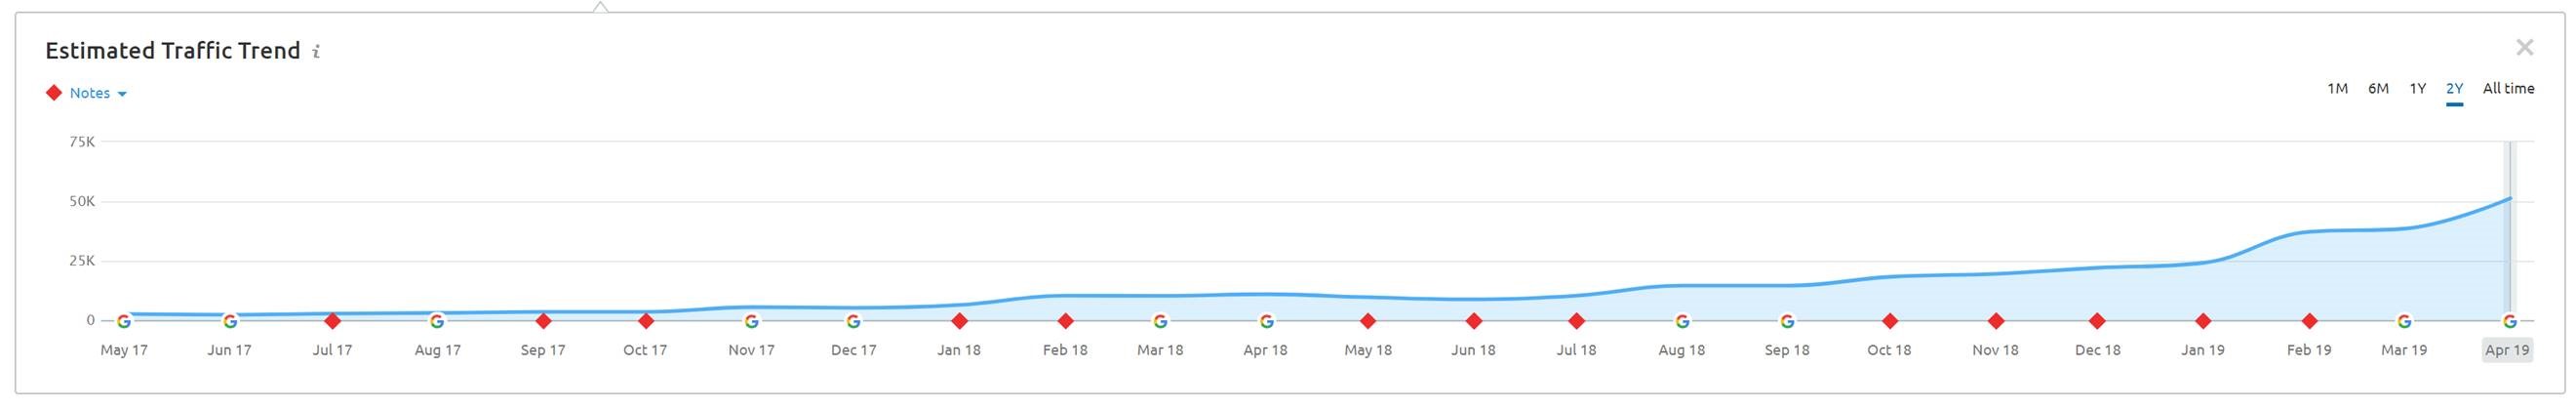 Eminent SEO - Real Client Traffic Trend - 04-26-19